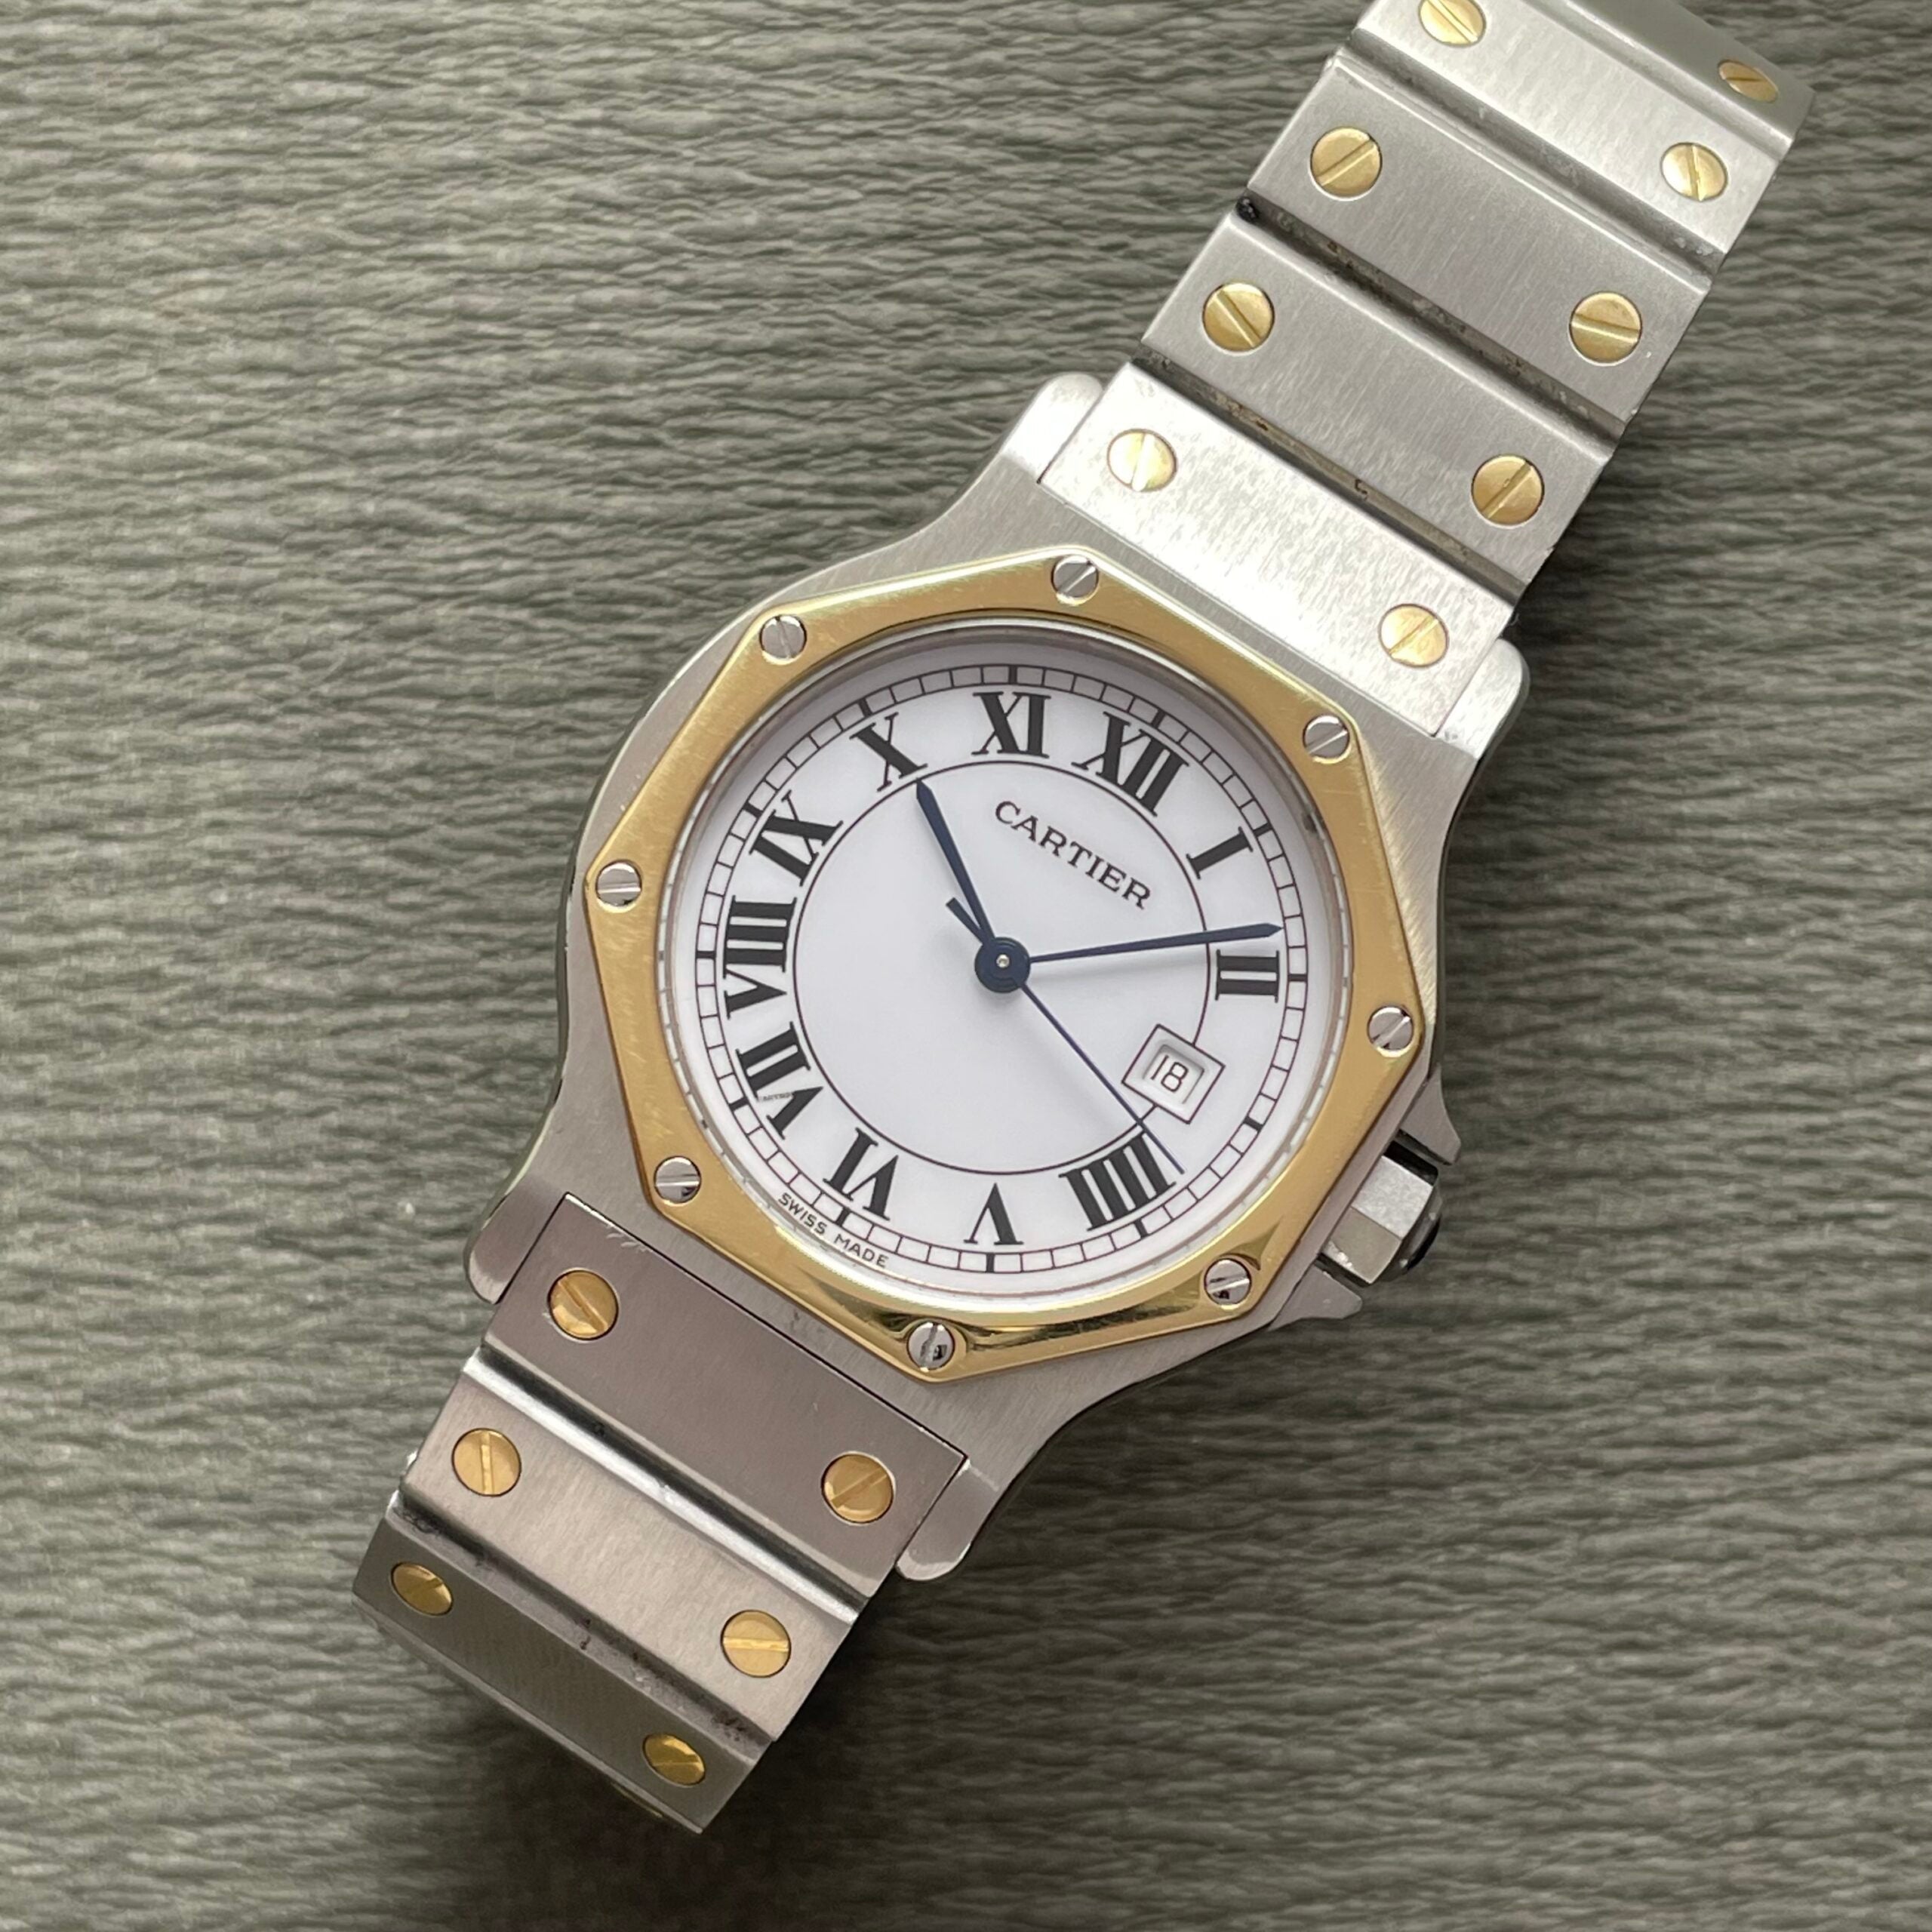 【Cartier】サントスオクタゴンLMコンビ自動巻き